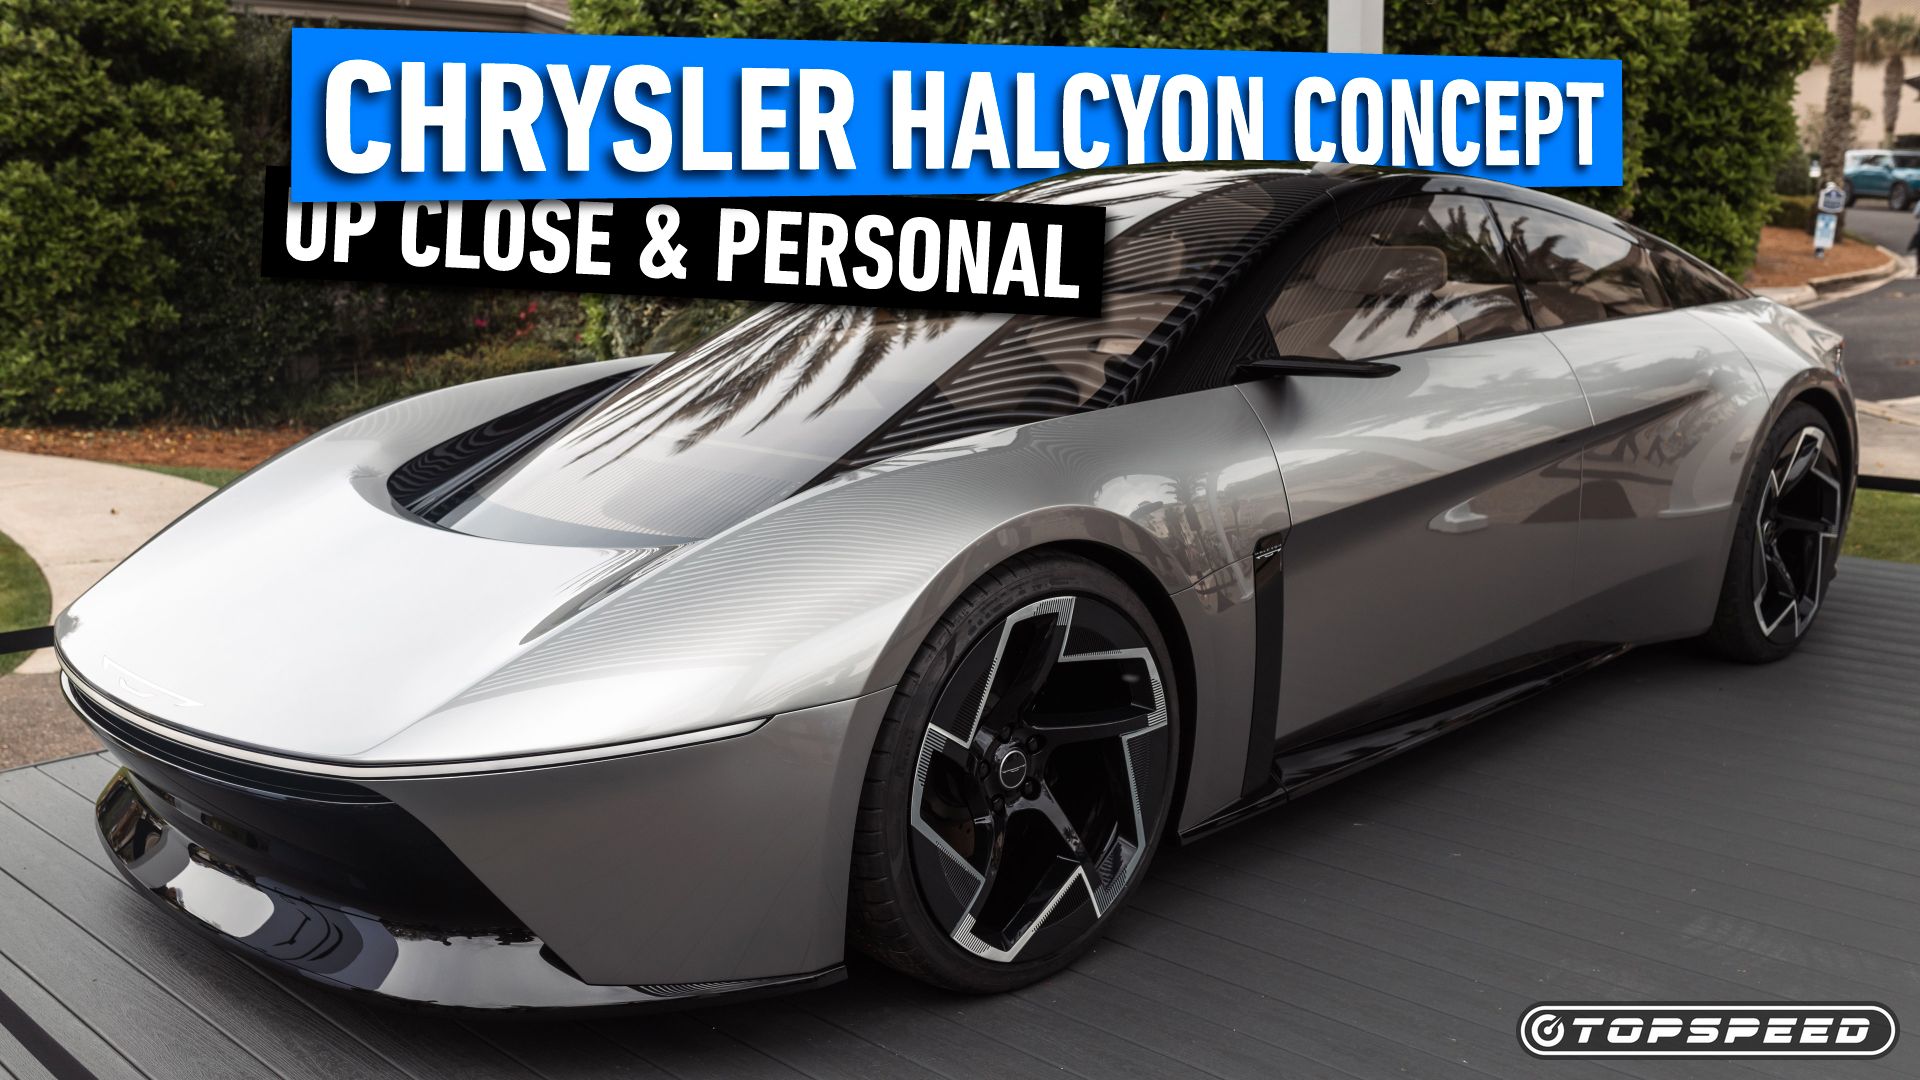 Chrysler-Halcyon-Concept-Up-Close-and-Personal-1